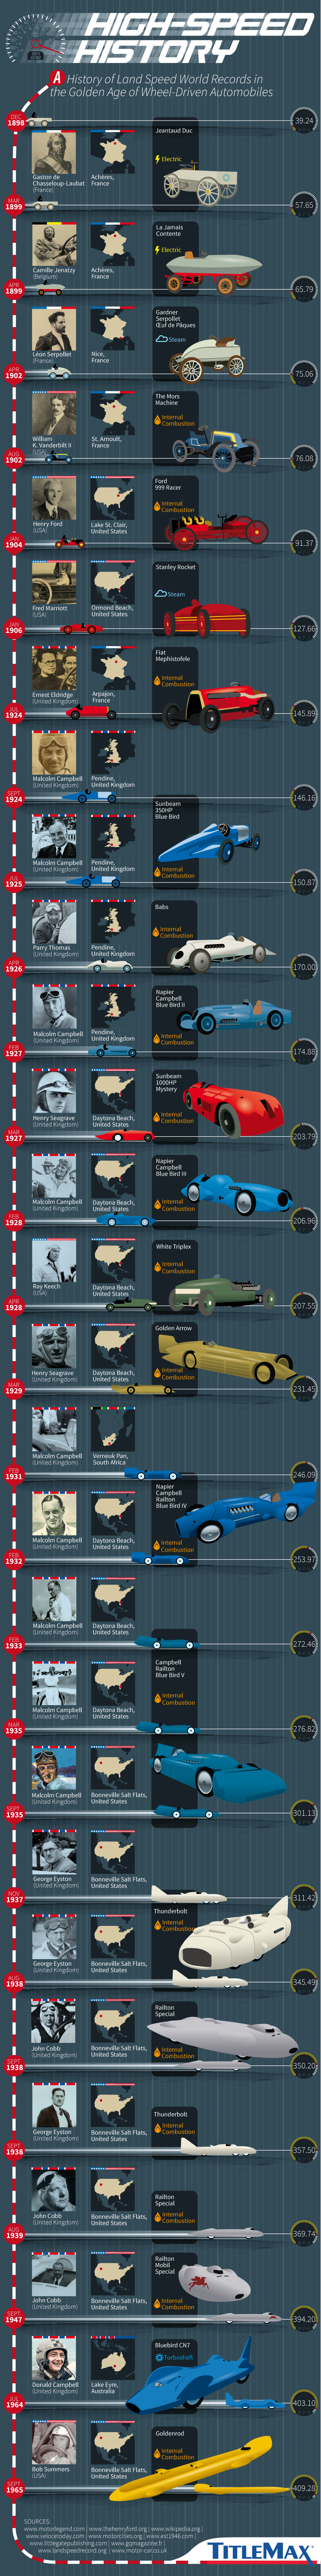 High-Speed History: A Timeline of Landspeed World Records